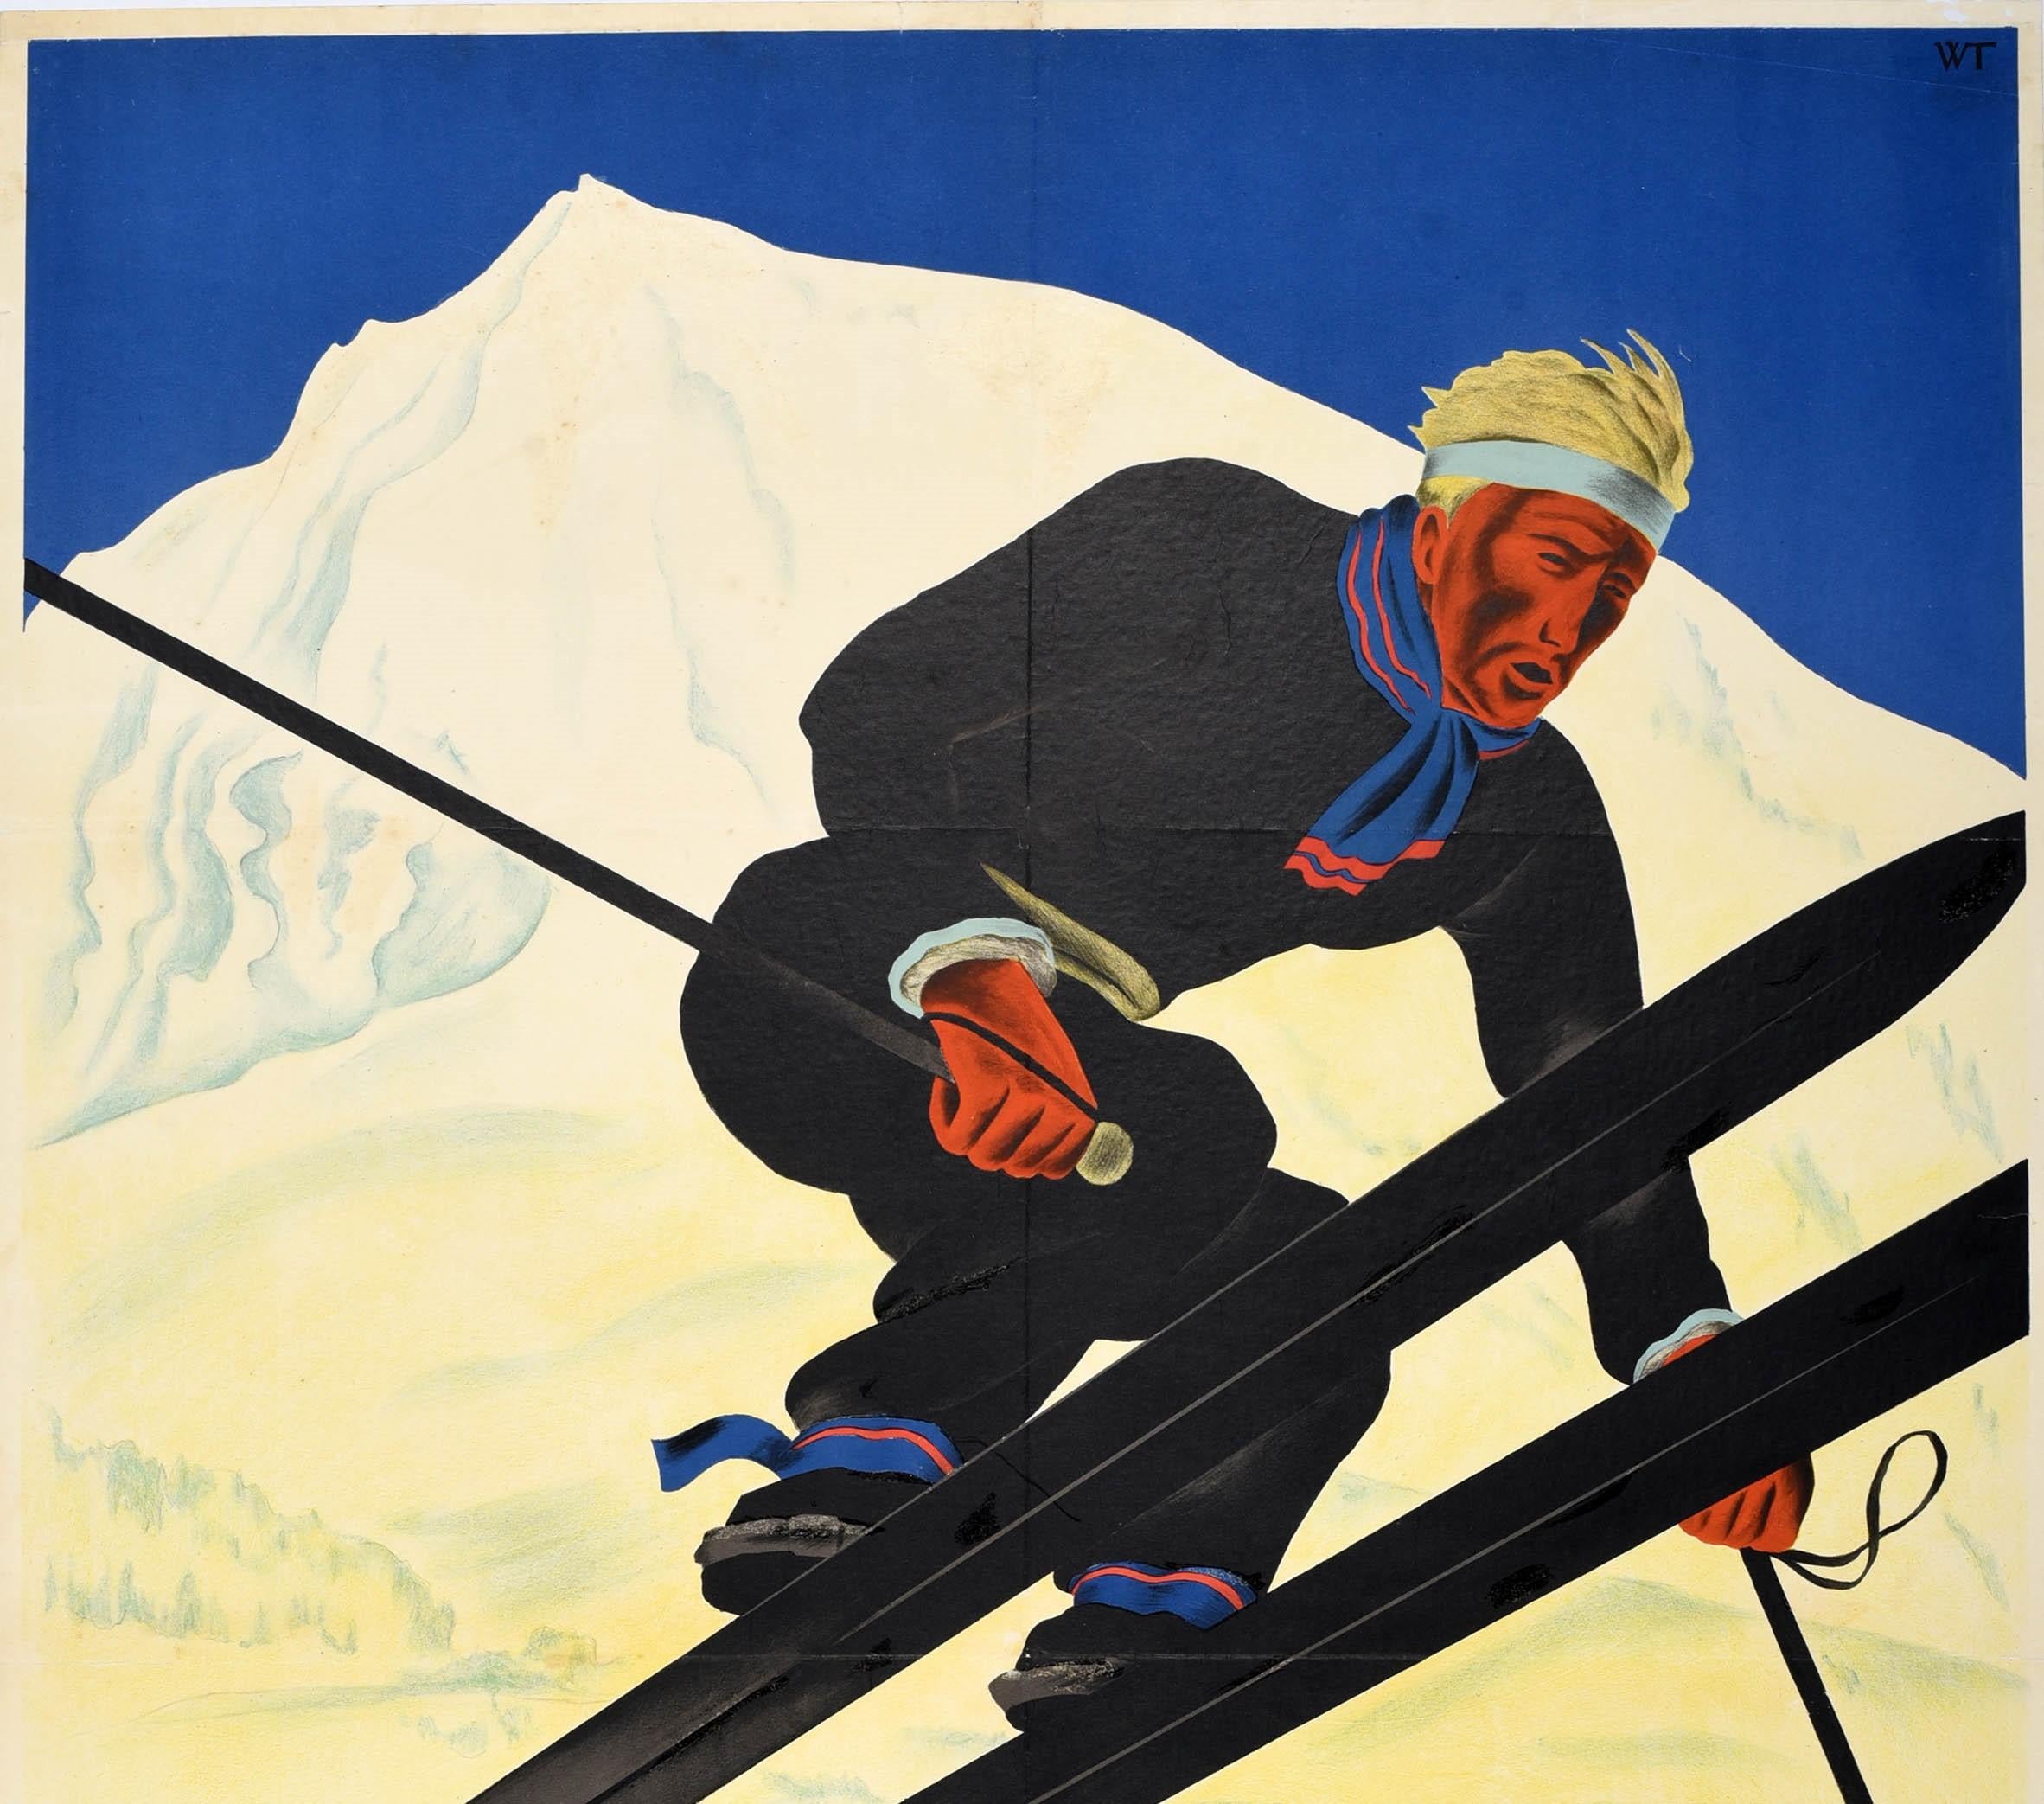 Original vintage skiing and winter sport travel poster for the Swiss alpine village in the Bernese Oberland region - Adelboden Suisse 1400m - featuring a dynamic design by Willy Trapp (1905-1984) depicting a skier wearing a black outfit, red striped